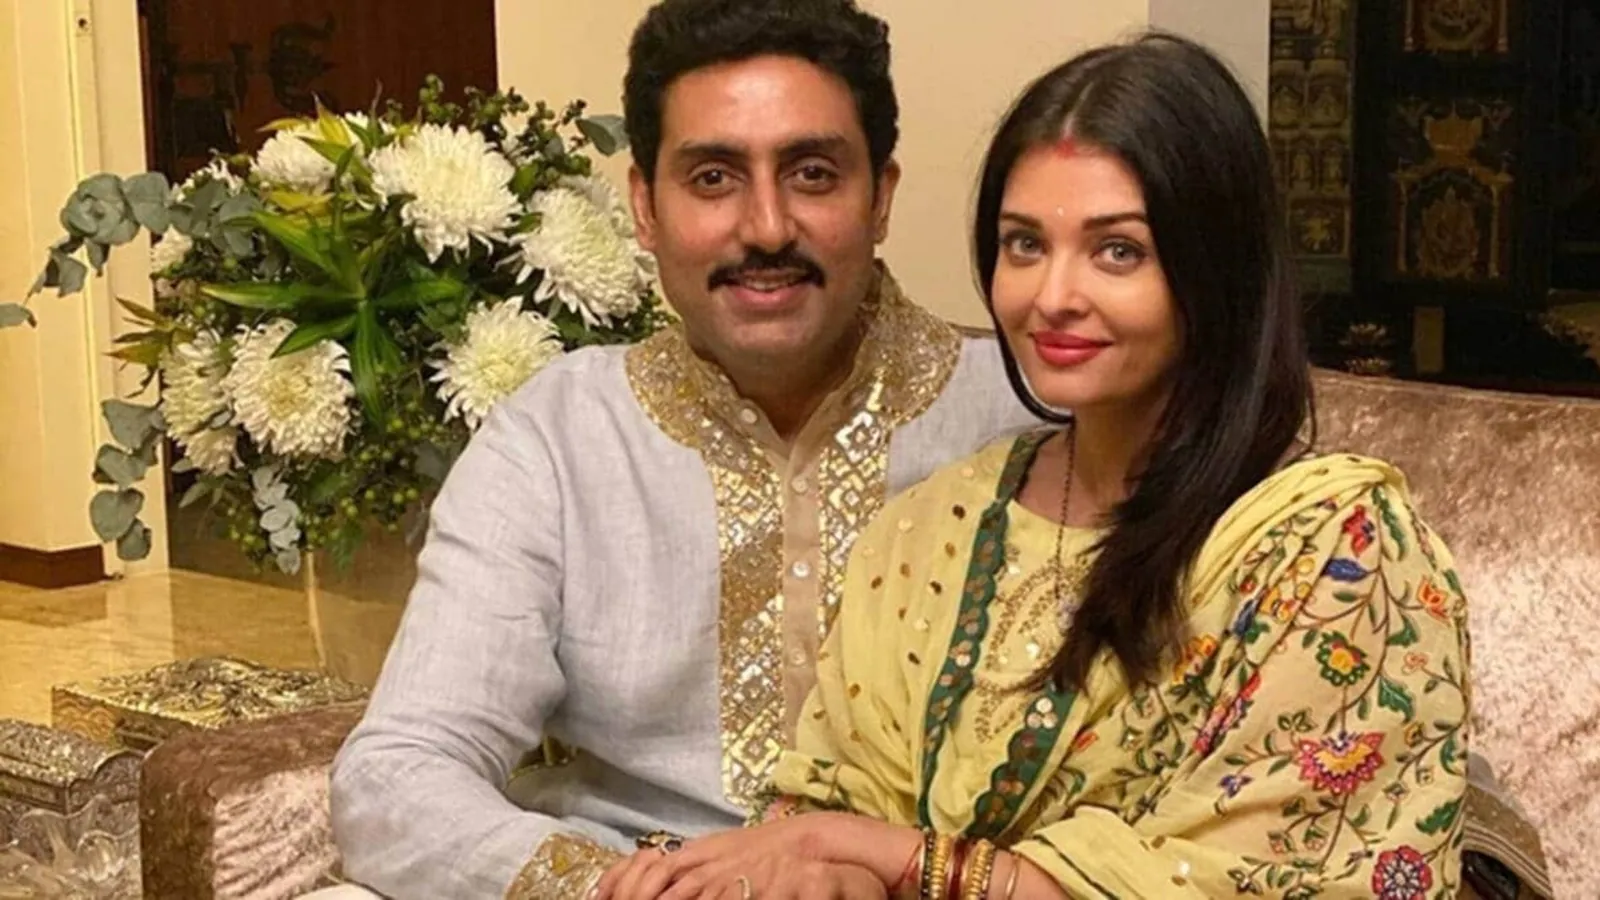 Abhishek Bachchan reveals wife Aishwarya Rai orders food for him as he can’t call room service: ‘Otherwise I won’t eat’